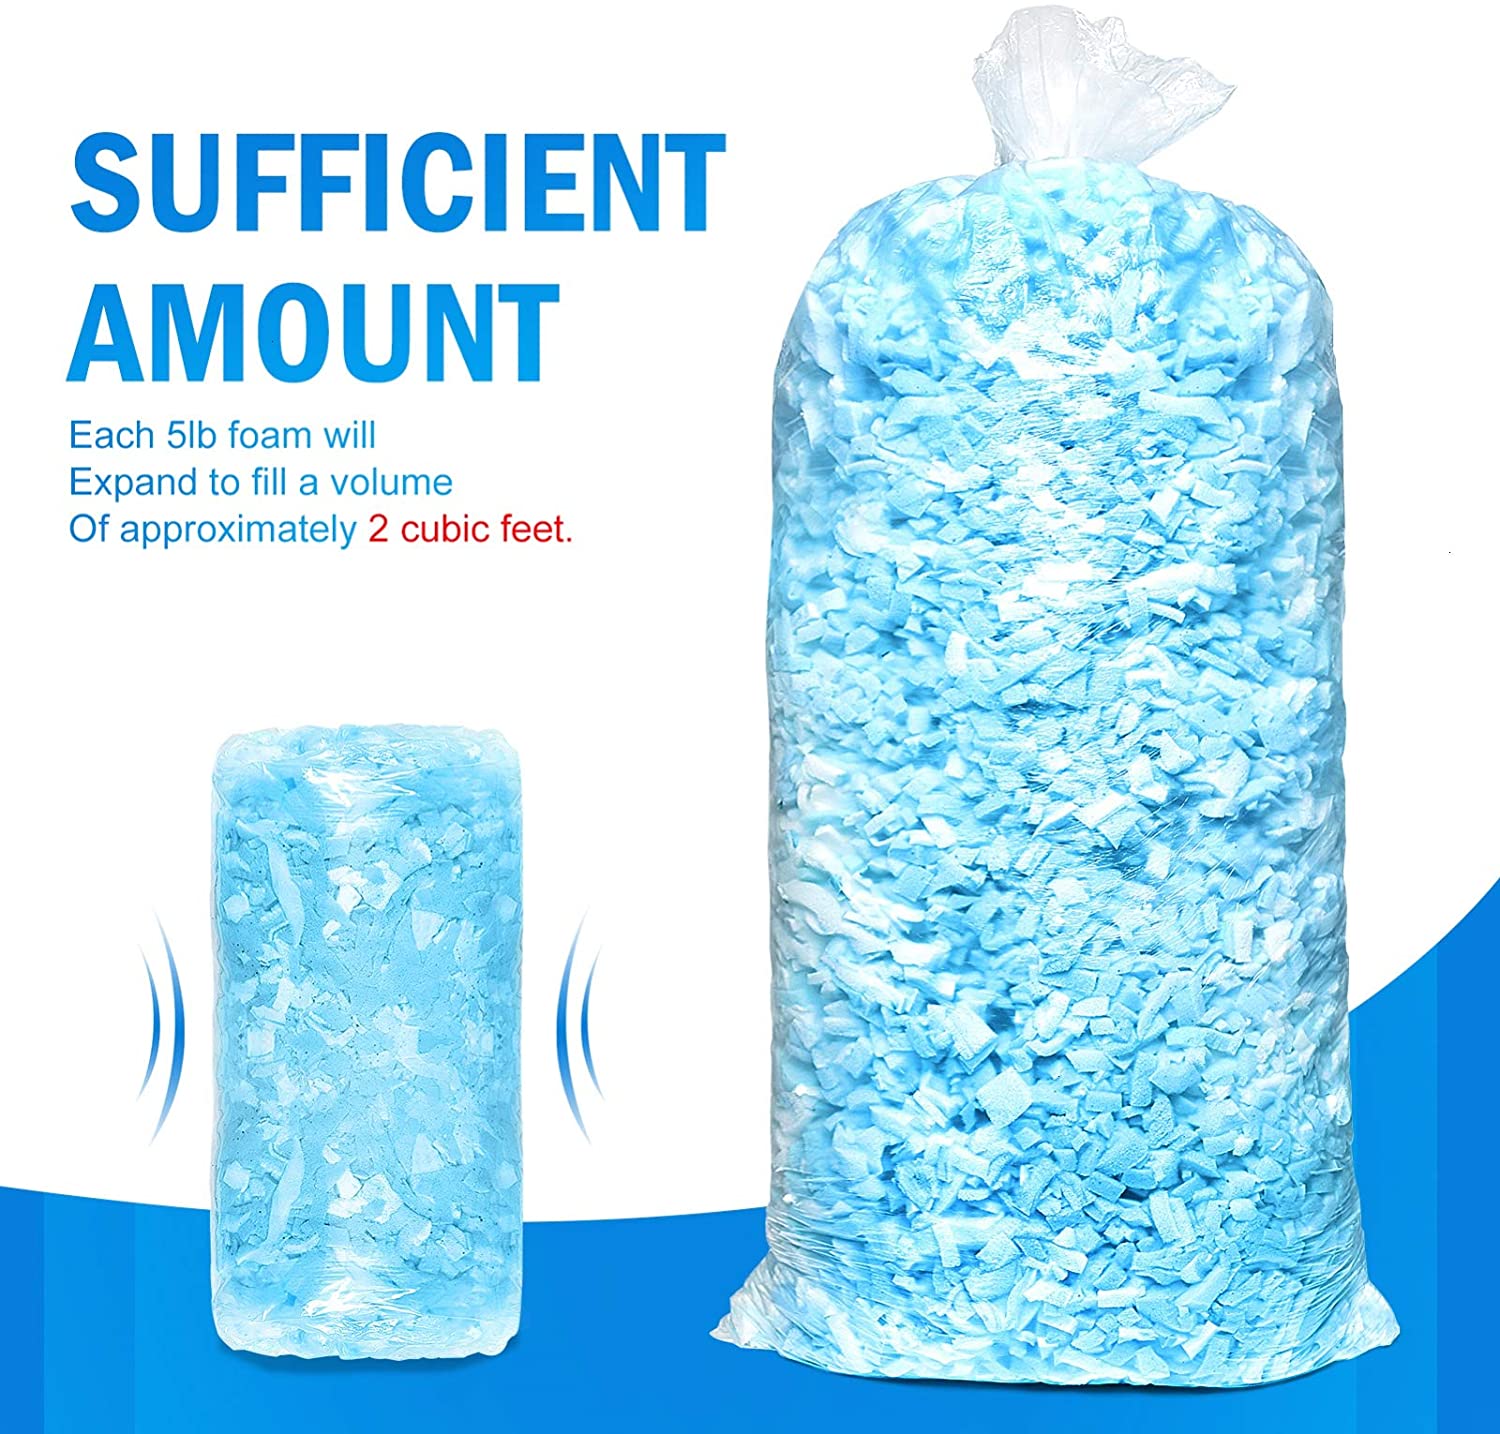 Shredded Memory Foam Fill Replacement for Bean Bags Chairs Pillows Dog Beds